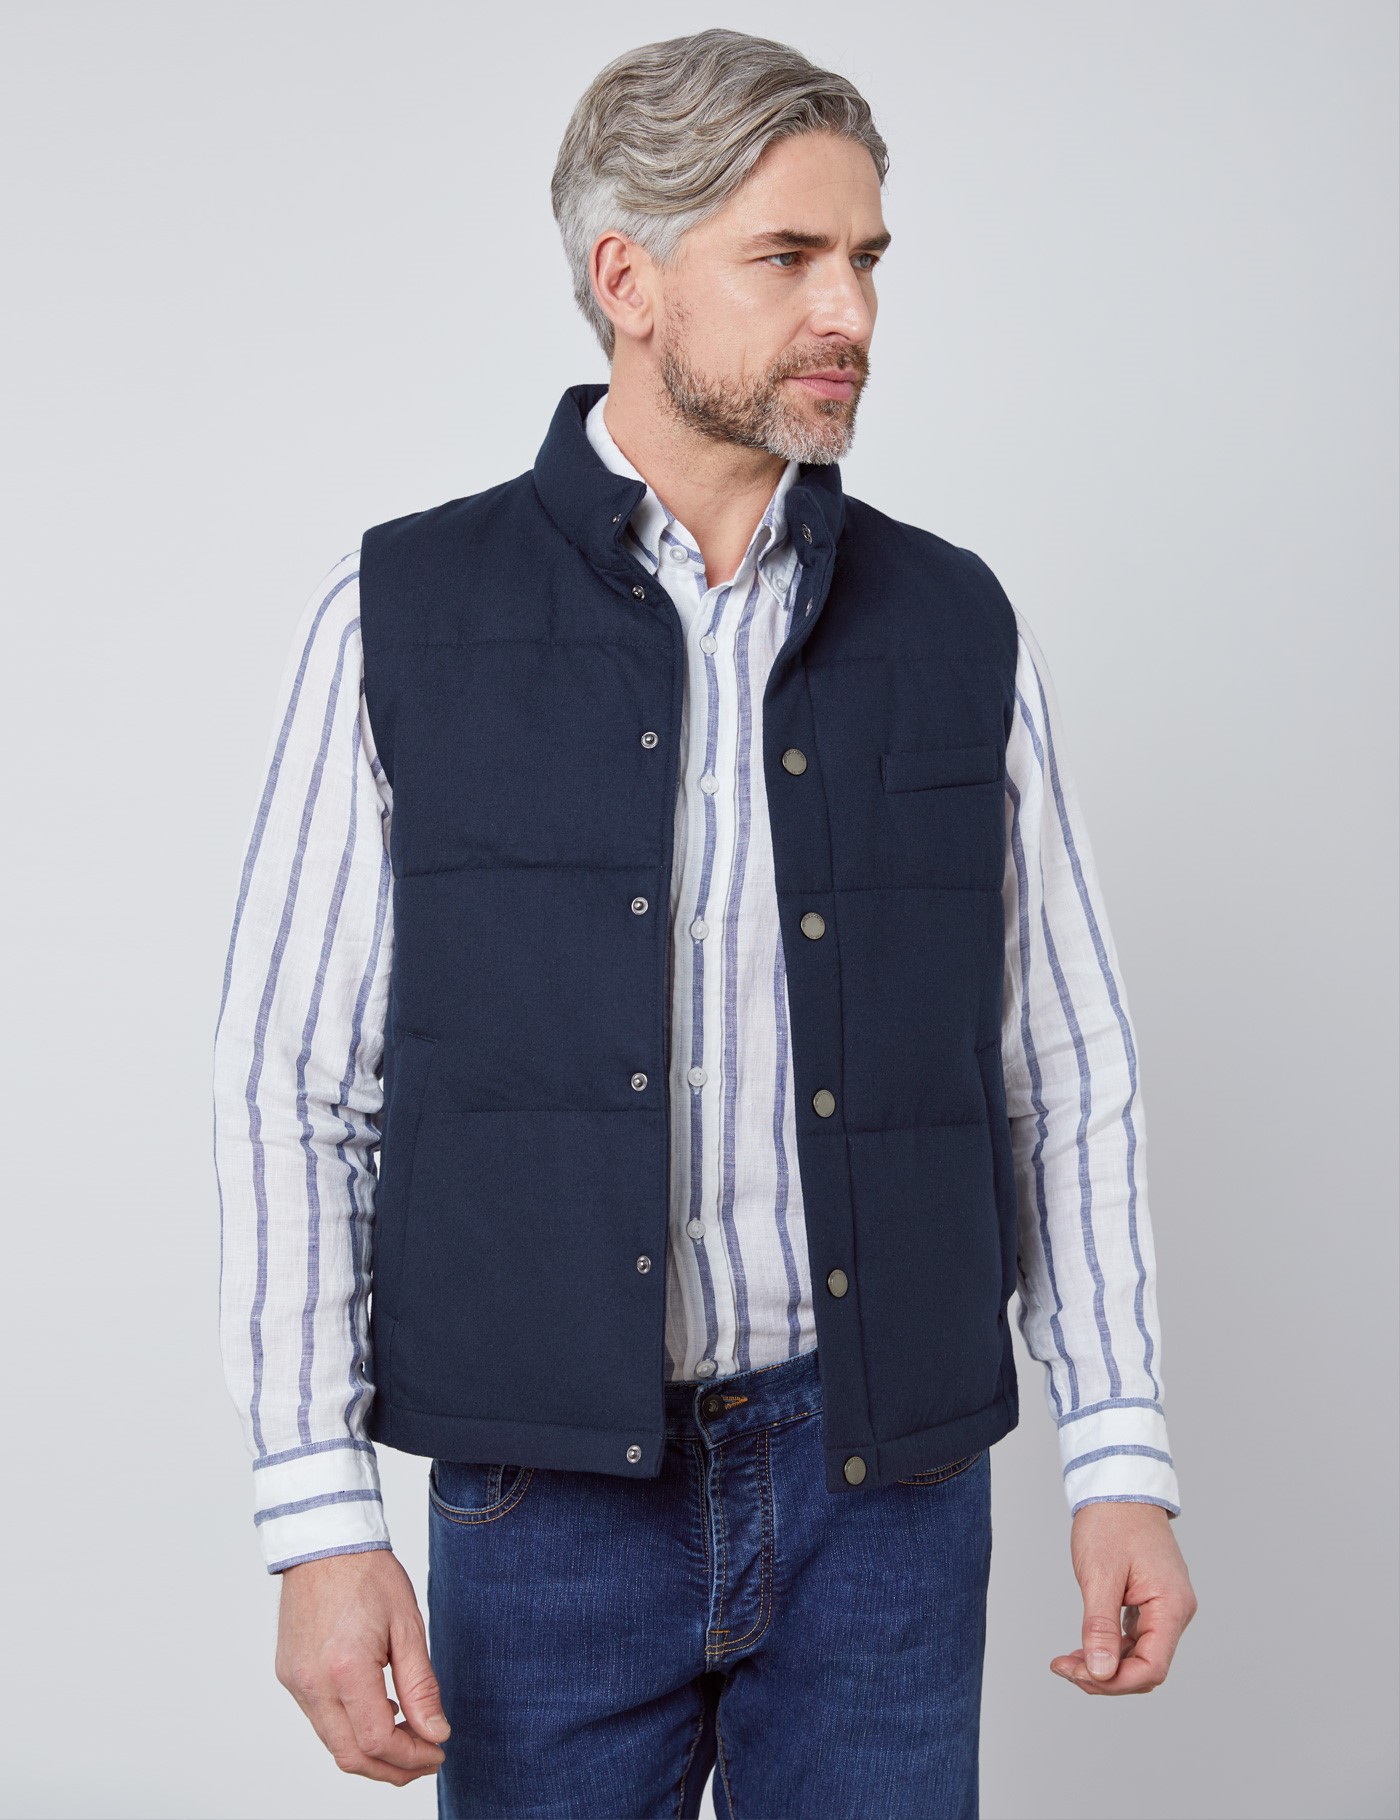 Wool Blend Men’s Gilet with Two Side Pockets in Navy| Hawes & Curtis | UK